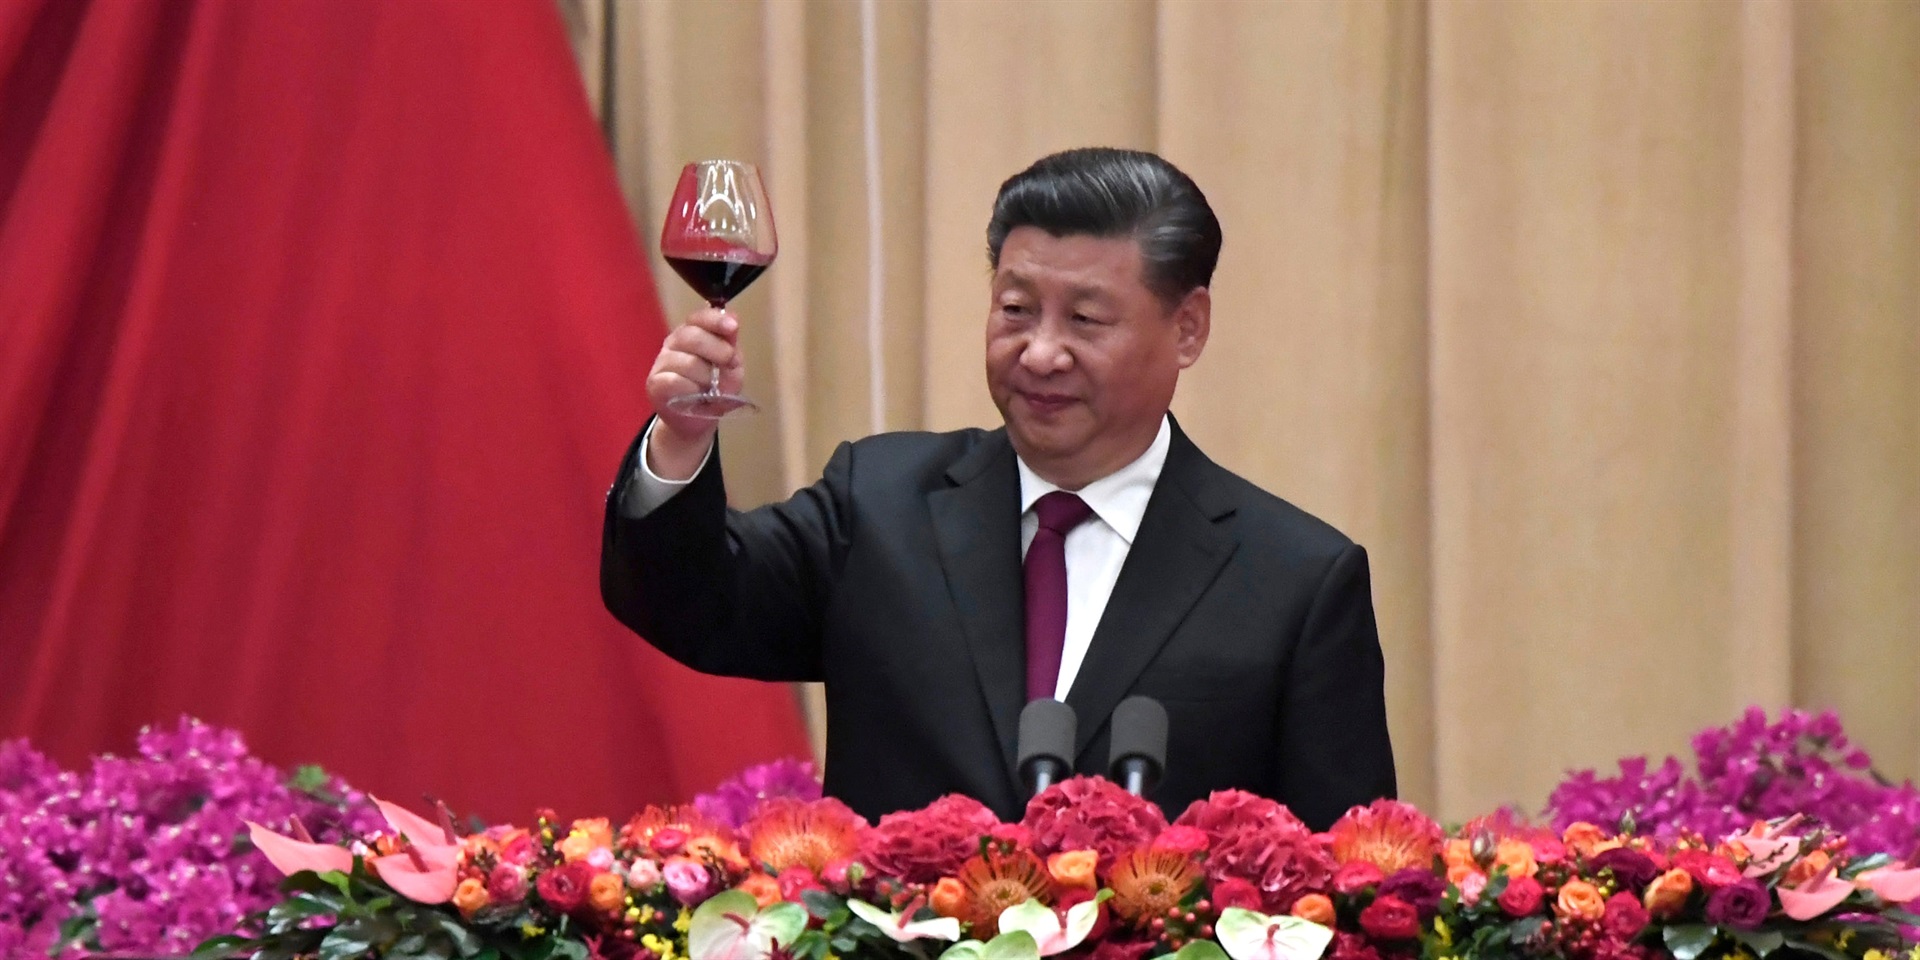 Chinese President Xi Jinping toasts at a banquet in Beijing, China, on on September 30, 2019.
